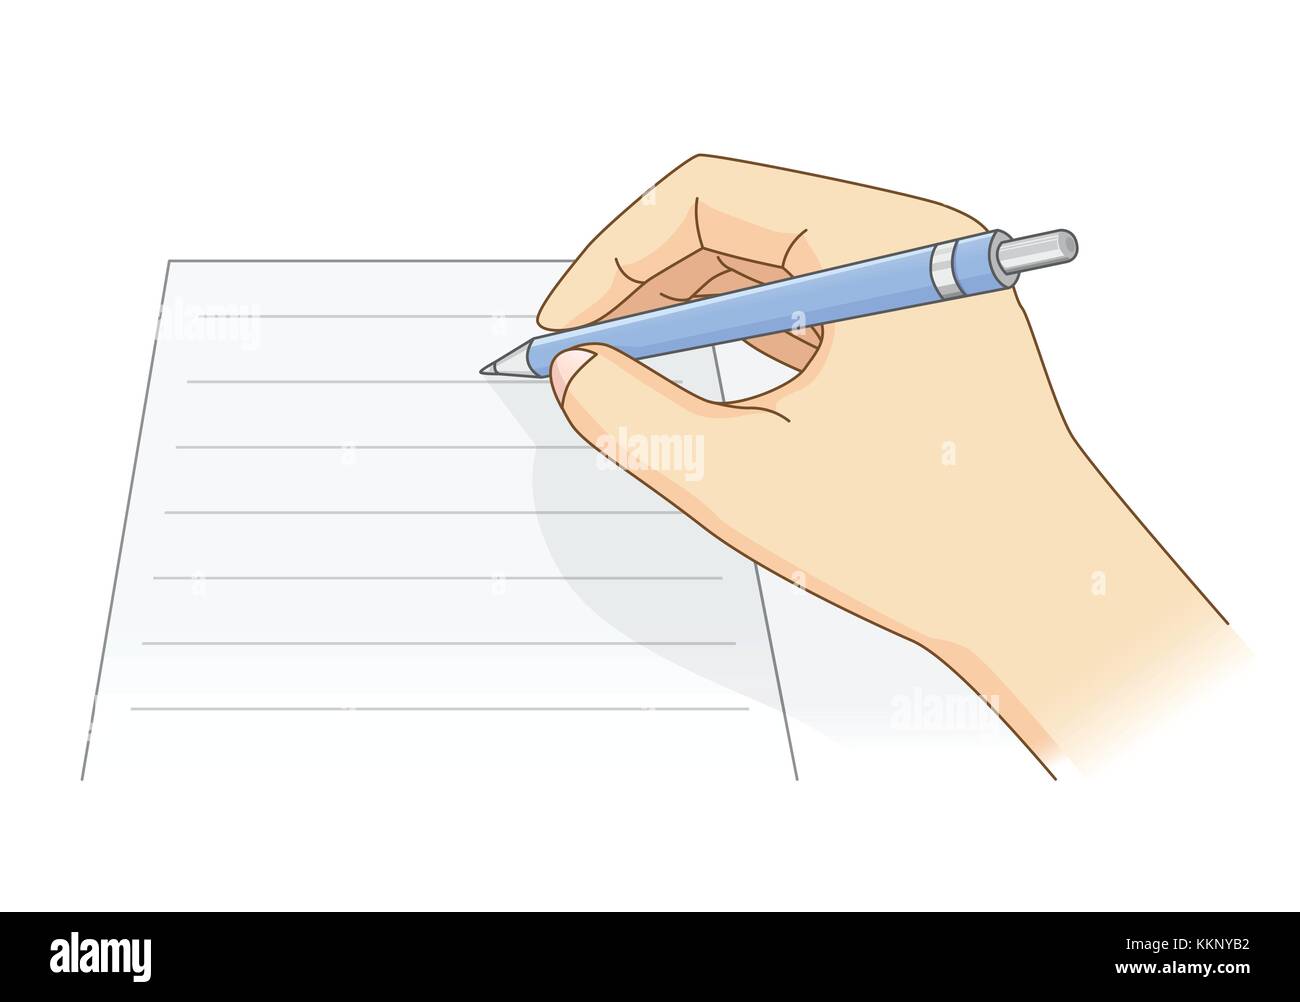 Hand holding a blue pen to writing on blank paper. Stock Vector